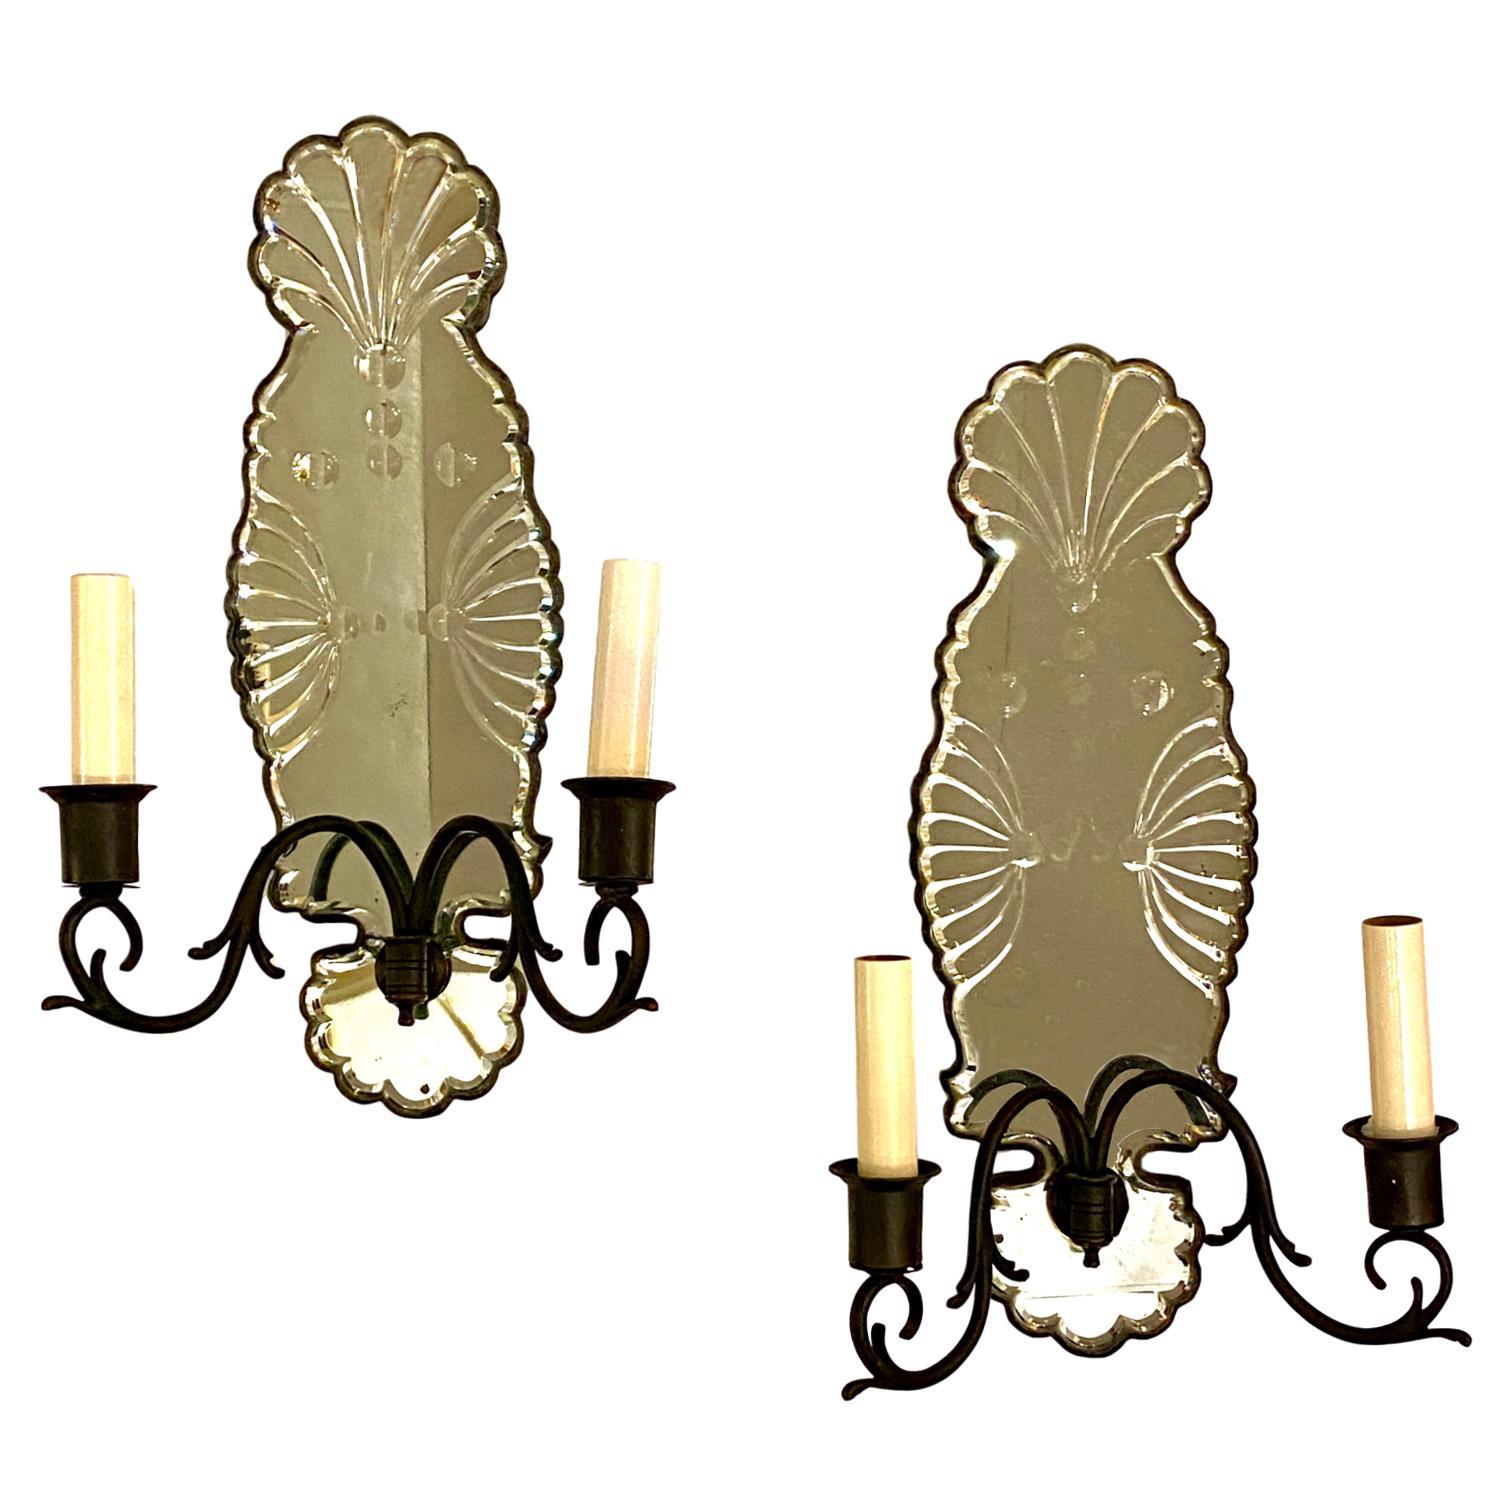 Pair of Large Mirrored Sconces